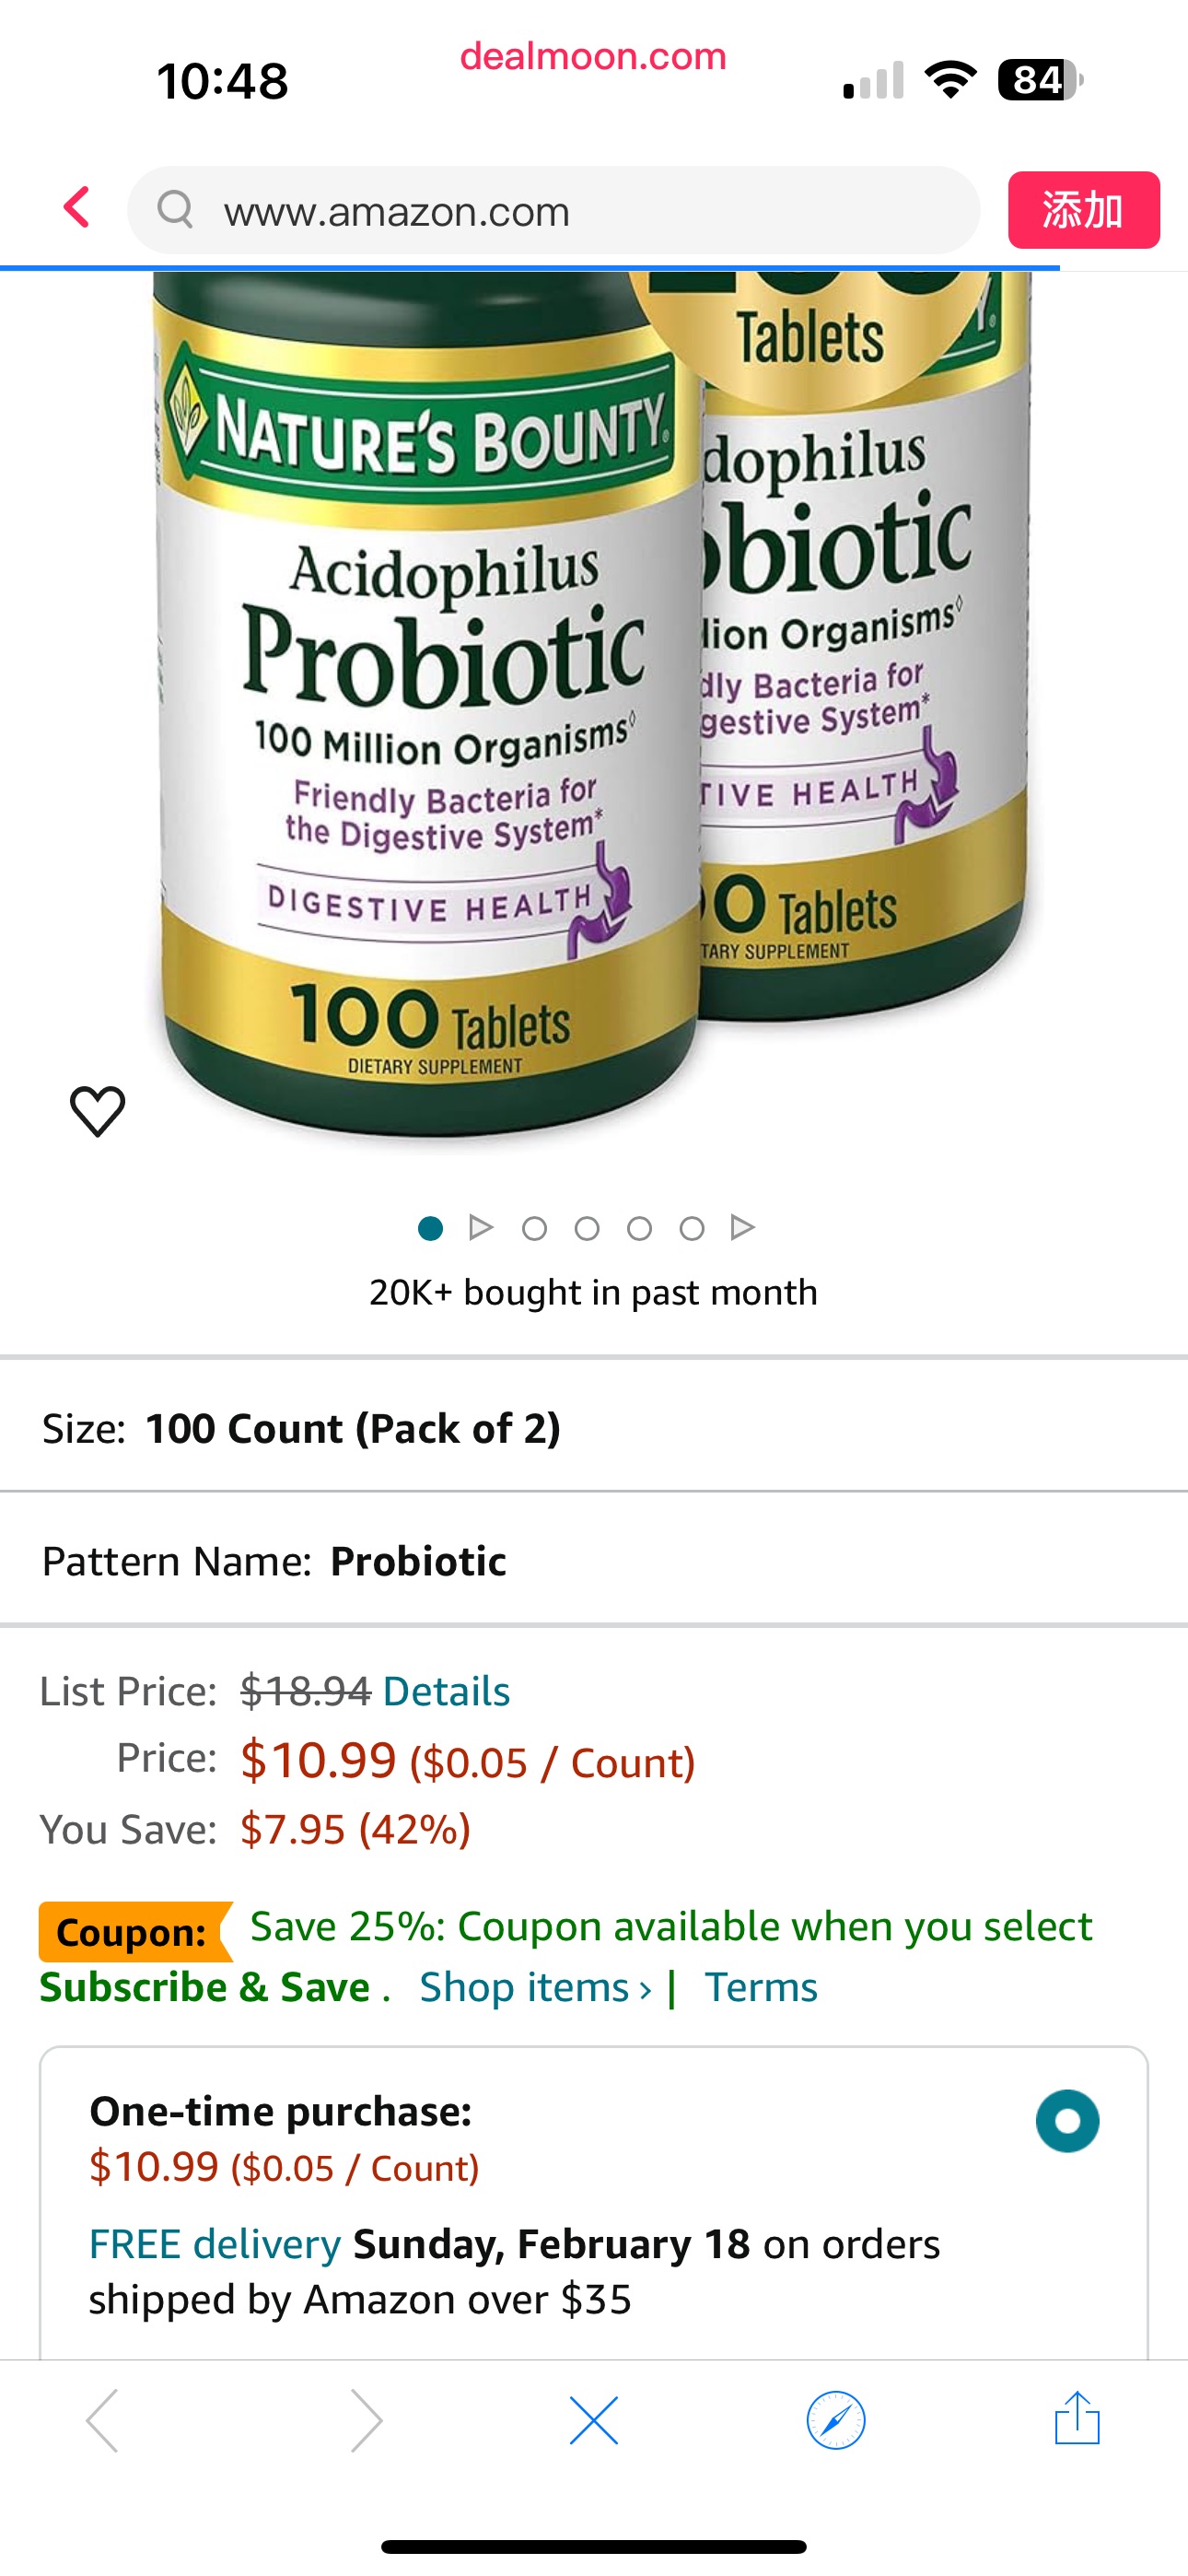 Amazon.com: Nature's Bounty Acidophilus Probiotic, Daily Probiotic Supplement, Supports Digestive Health, Twin Pack, 200 Tablets : Health & Household益生菌胶囊续订